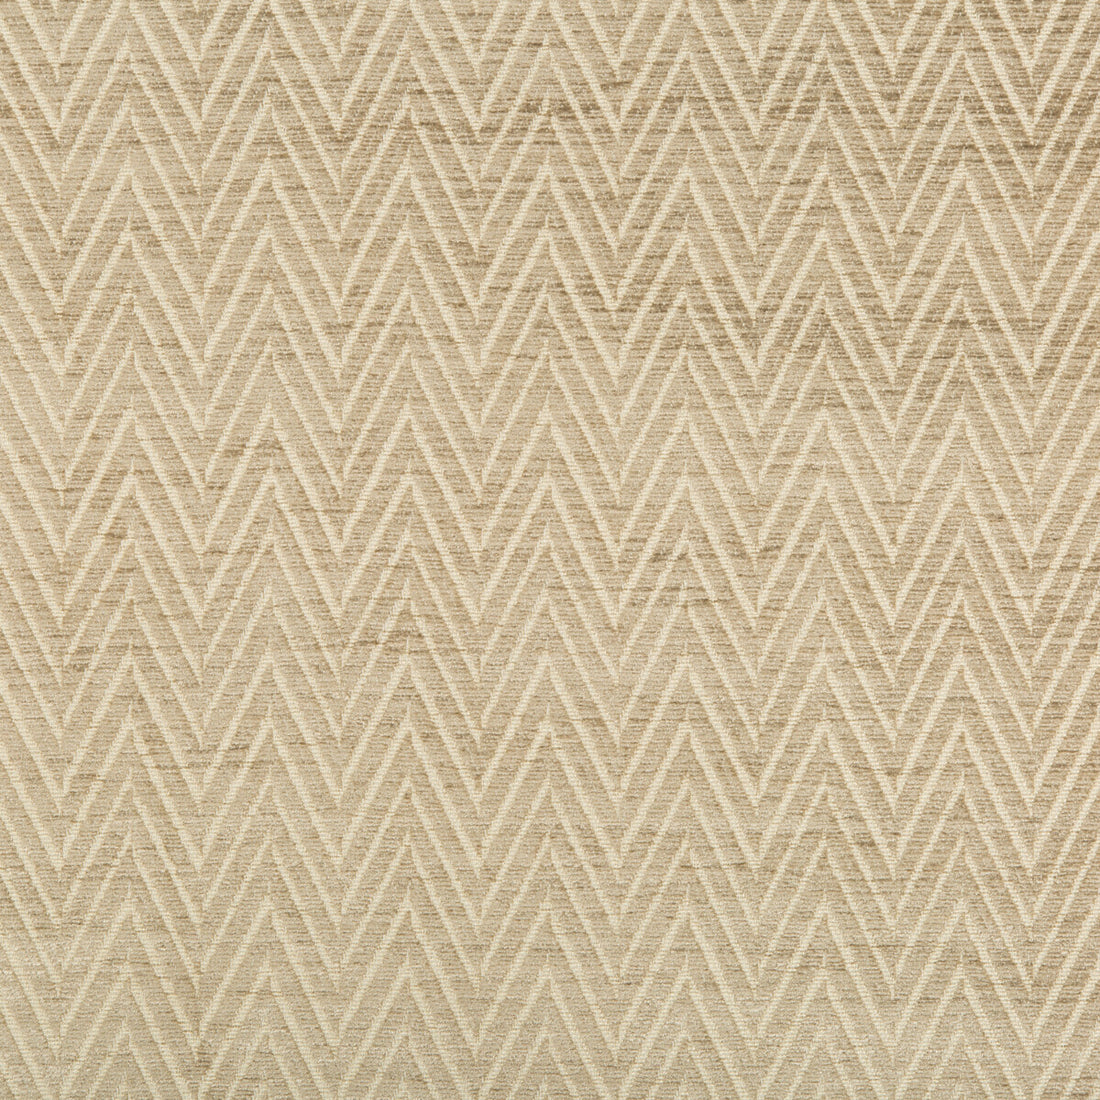 Kravet Design fabric in 34690-116 color - pattern 34690.116.0 - by Kravet Design in the Performance Crypton Home collection